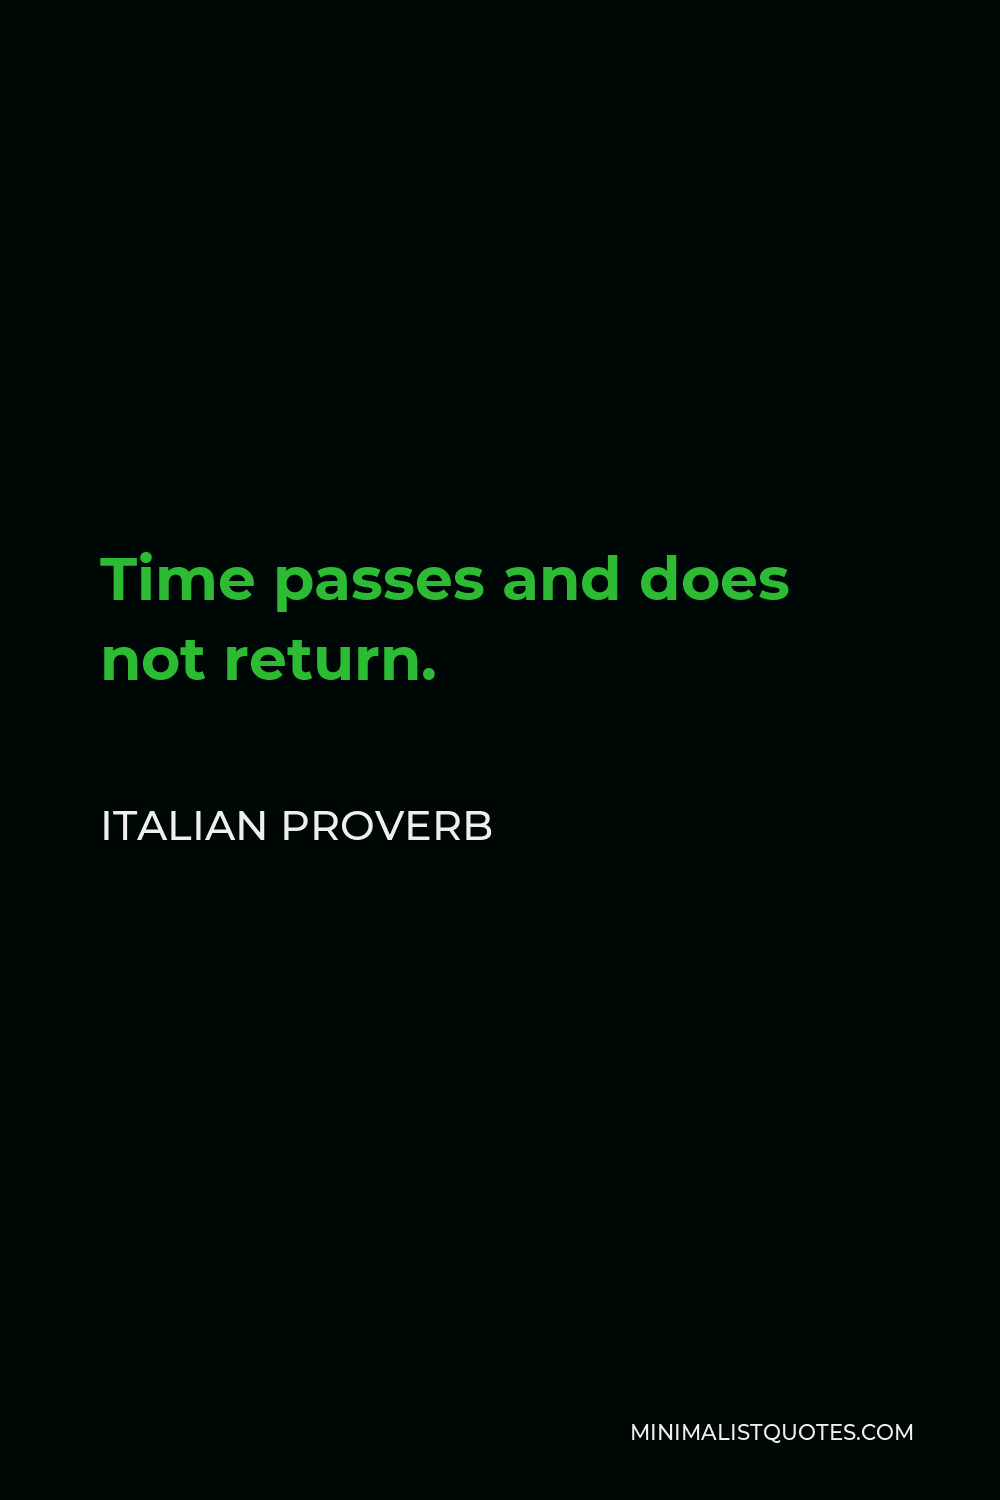 Italian Proverb Quote - Time passes and does not return.